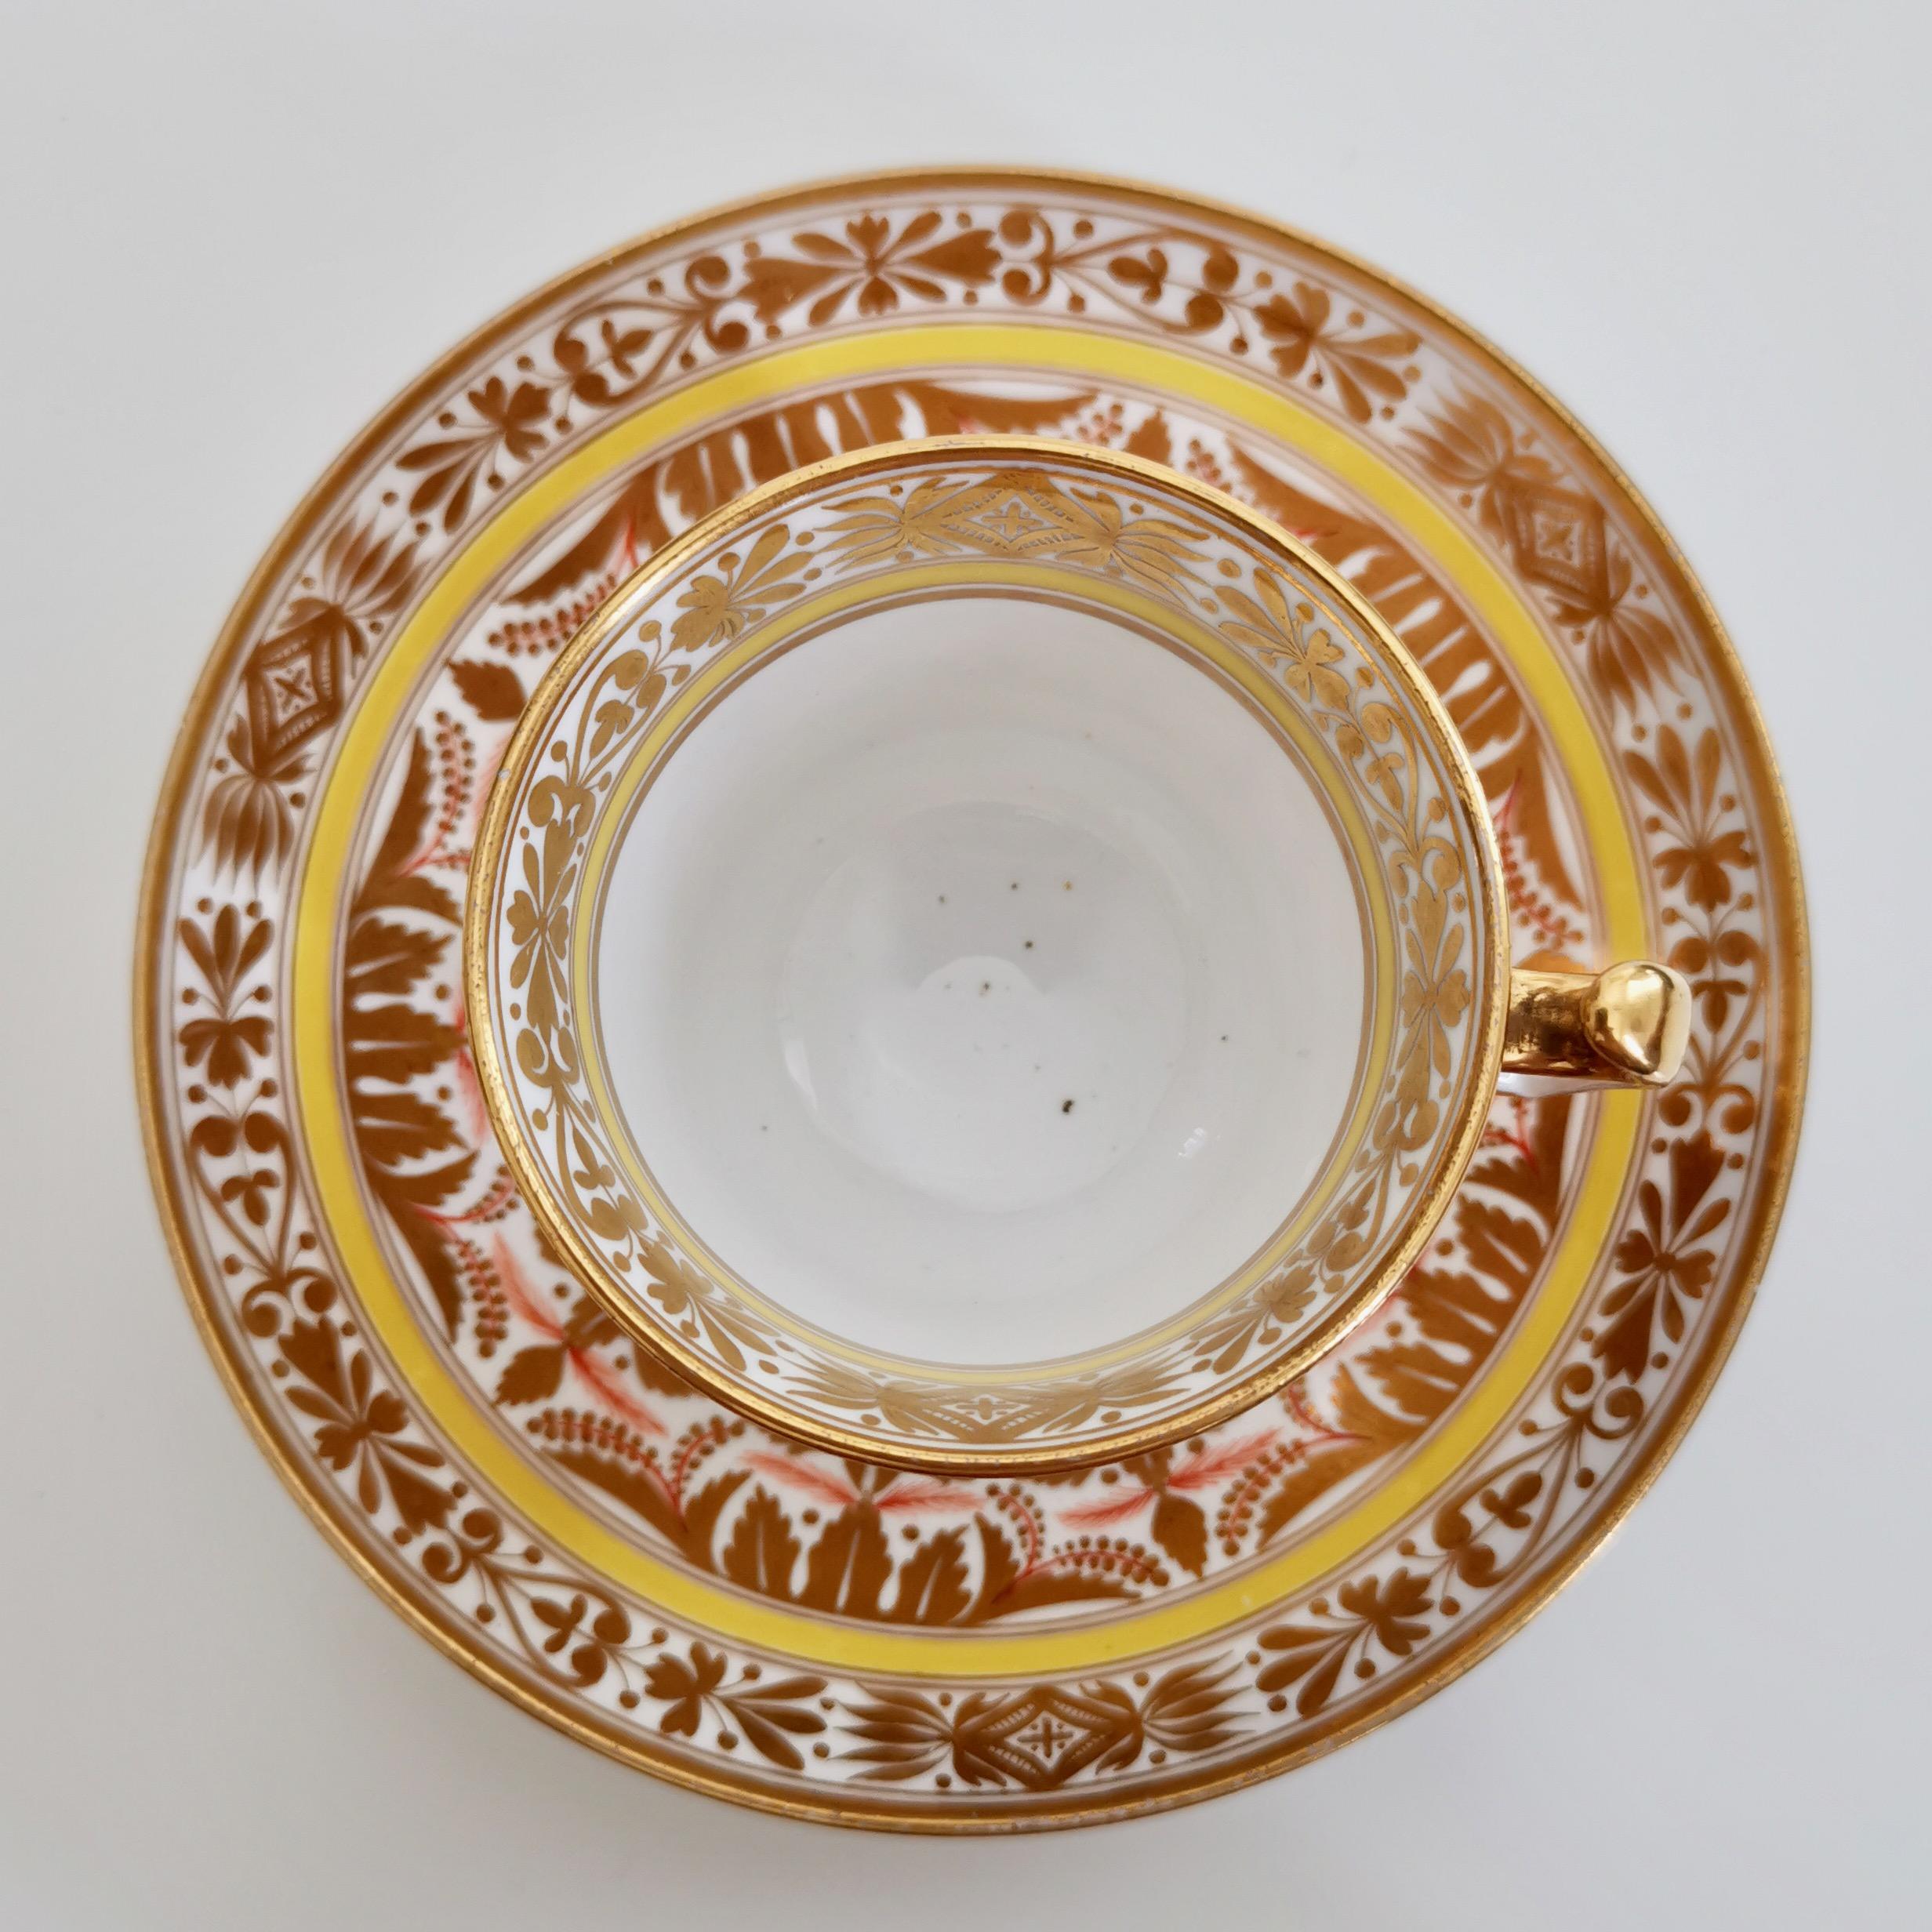 Spode Porcelain Teacup Set, Gilt, Yellow and Red Regency Pattern, circa 1815 5